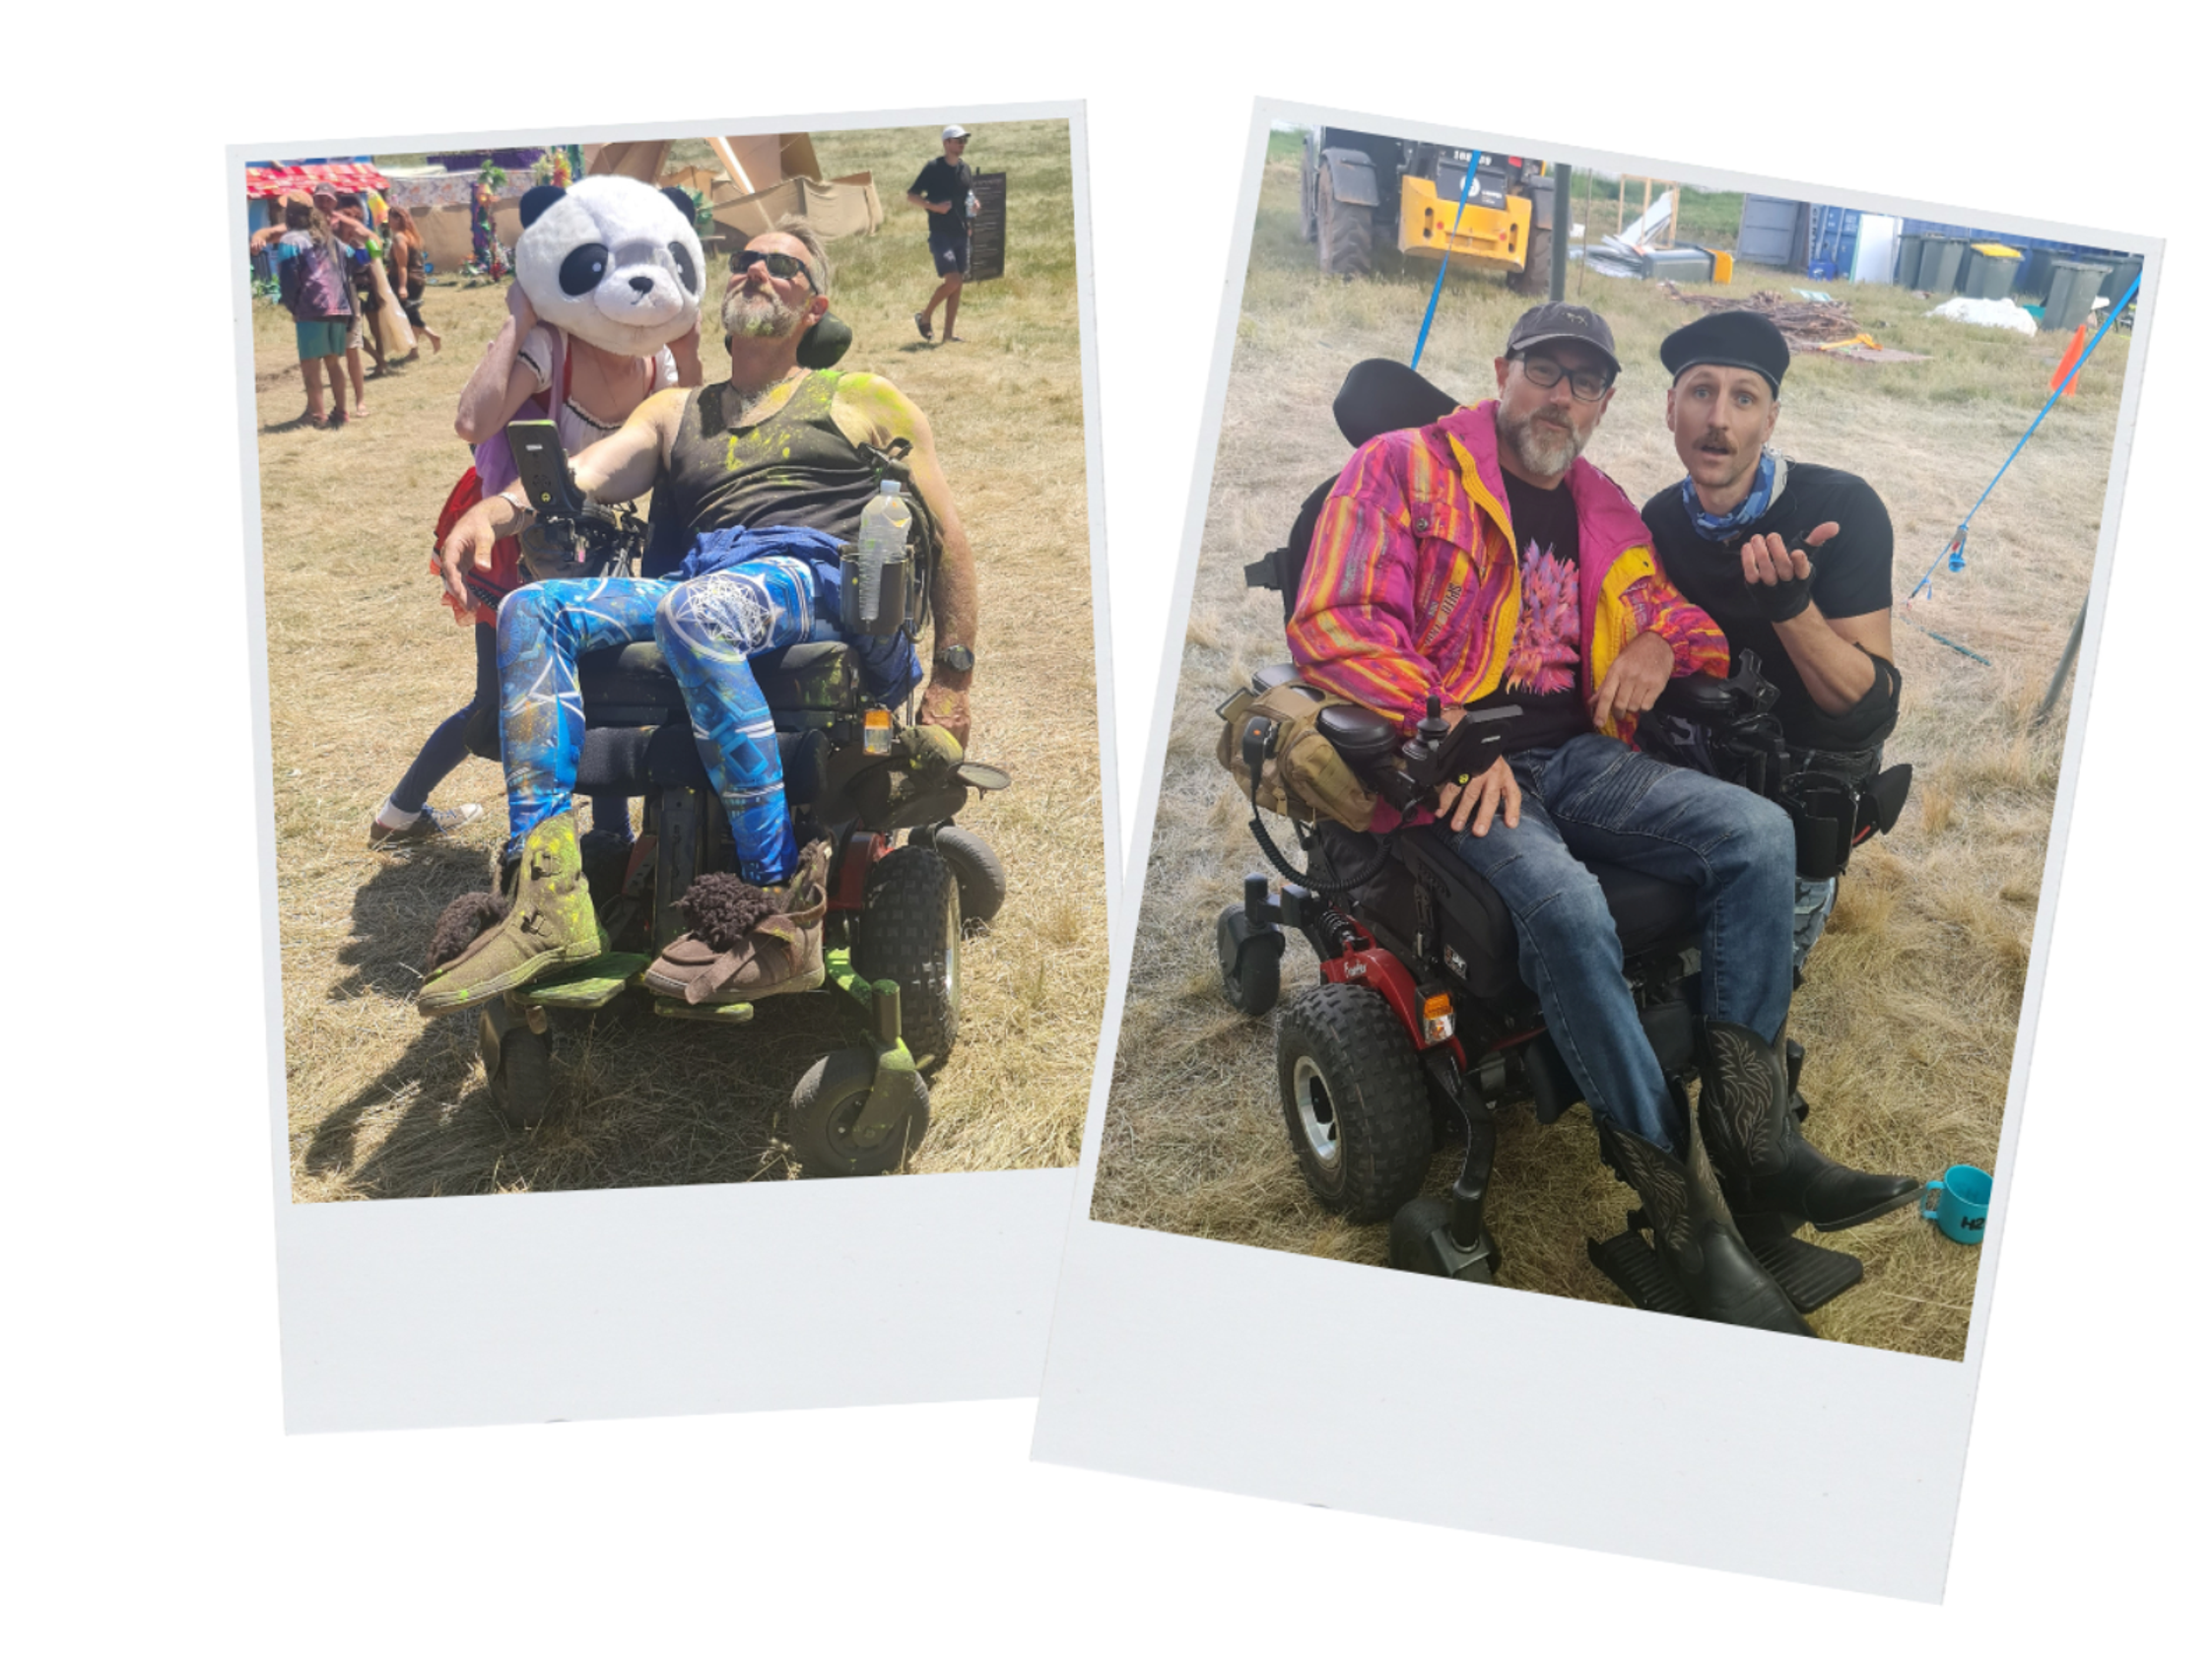 Two polaroid photos of Mark at the Elysium Gathering festival on his specialised wheelchair